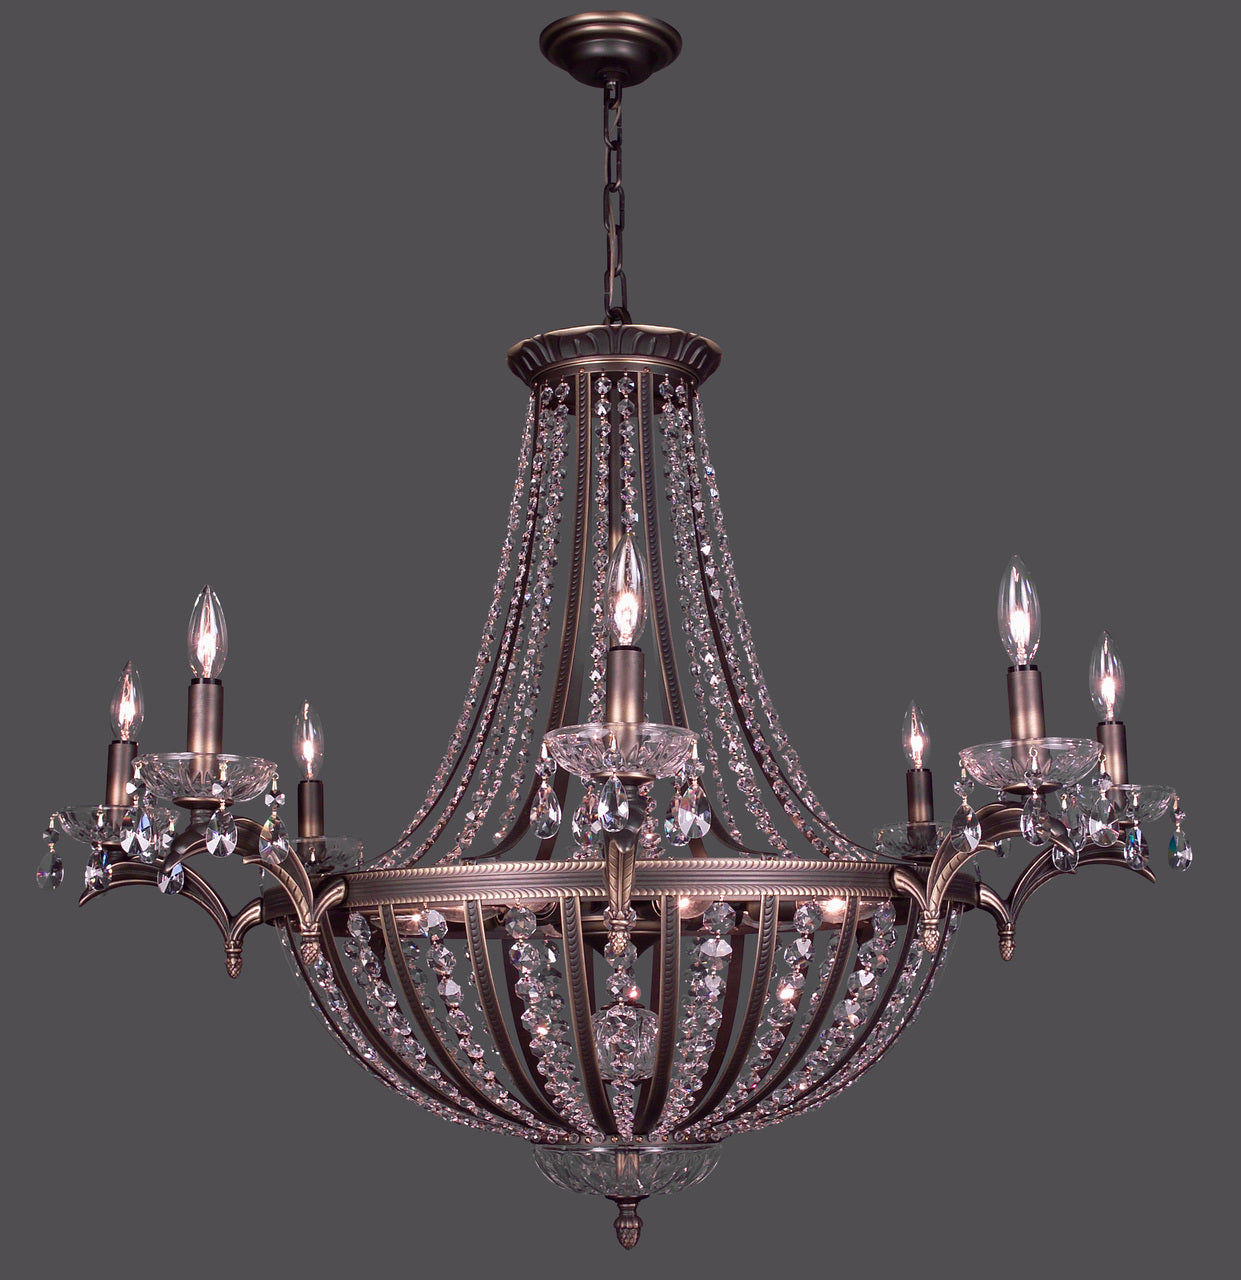 Classic Lighting 1928 RB S Terragona Crystal Chandelier in Roman Bronze (Imported from Spain)